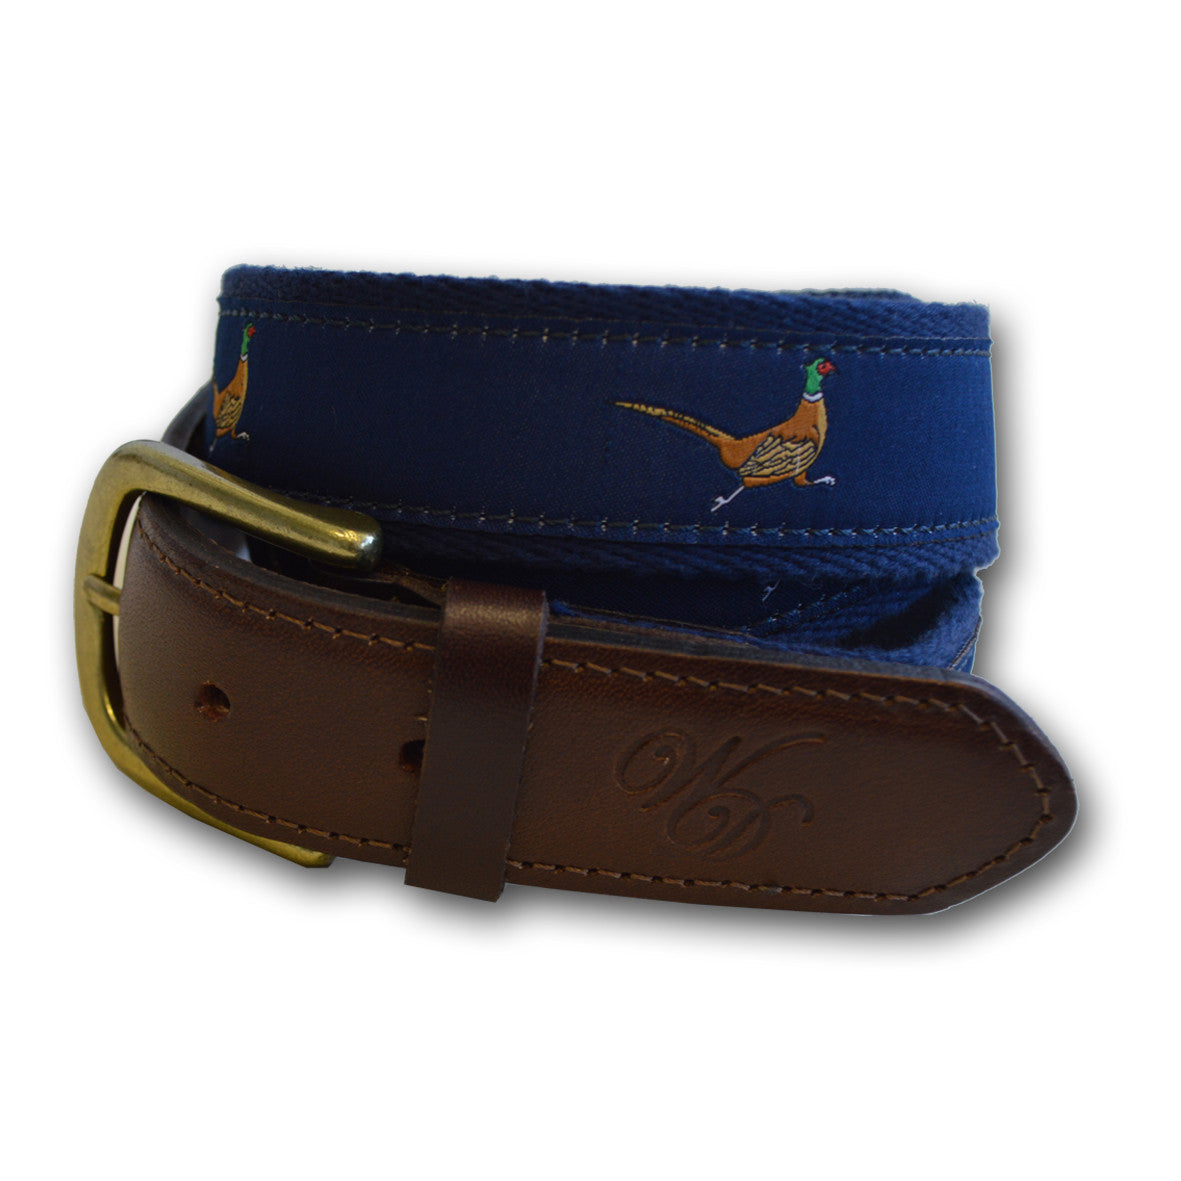 Pheasant Canvas and Leather Belt by Wingfield Digby